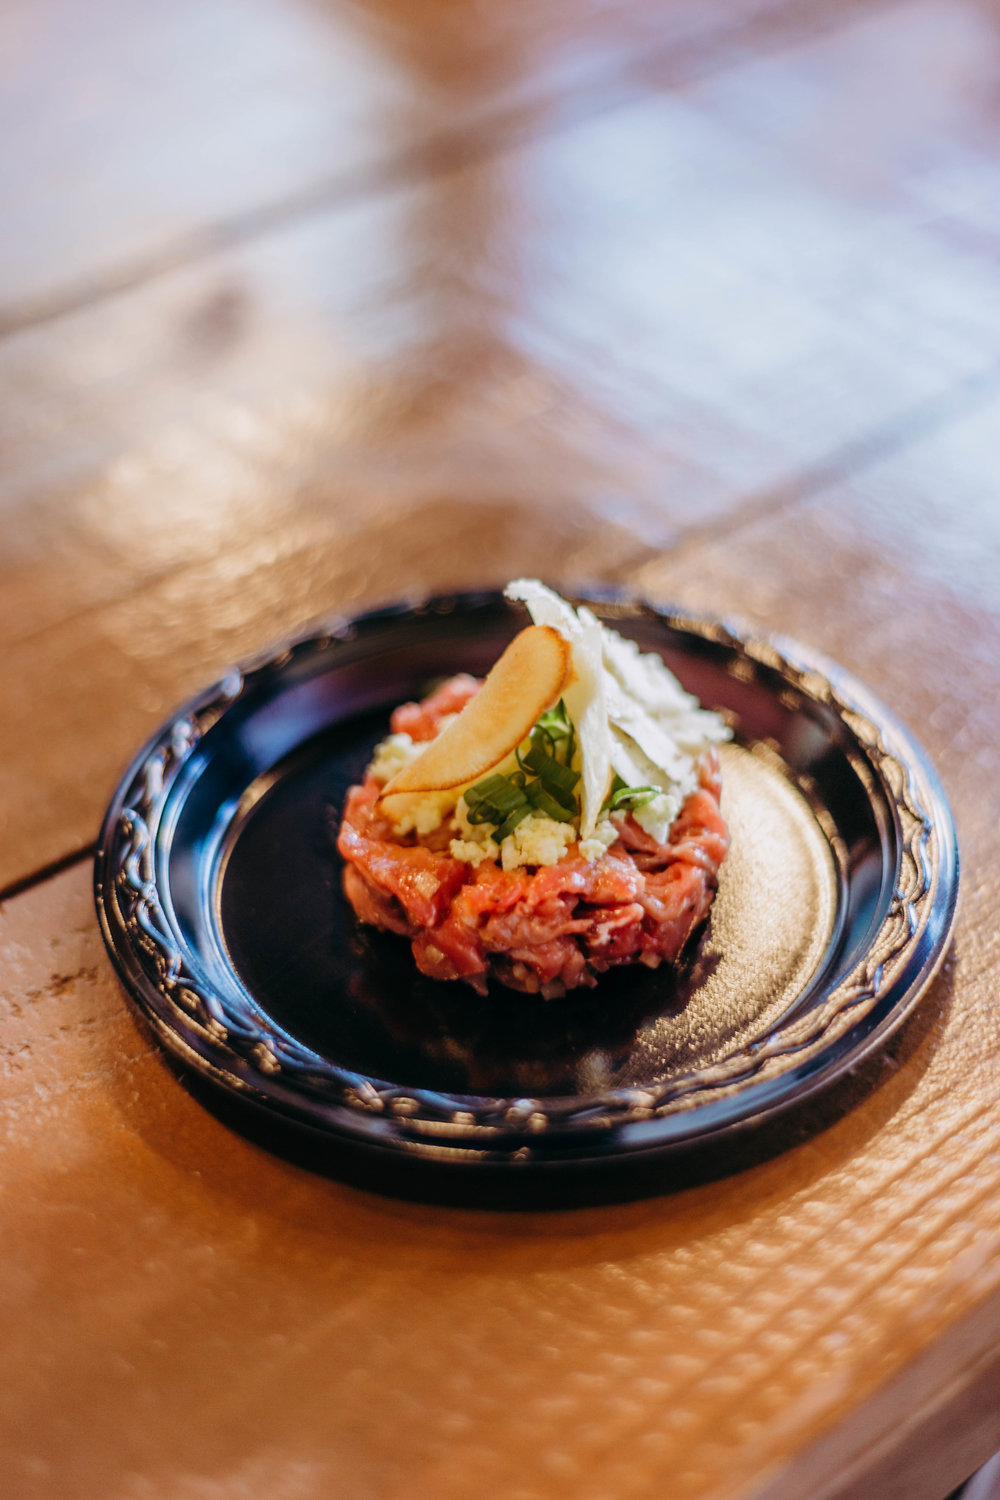  The first course - Beef Tartar with Herbs and Boiled Egg paired with Red Dragon Cheese. Photo by Jennifer Meza. 